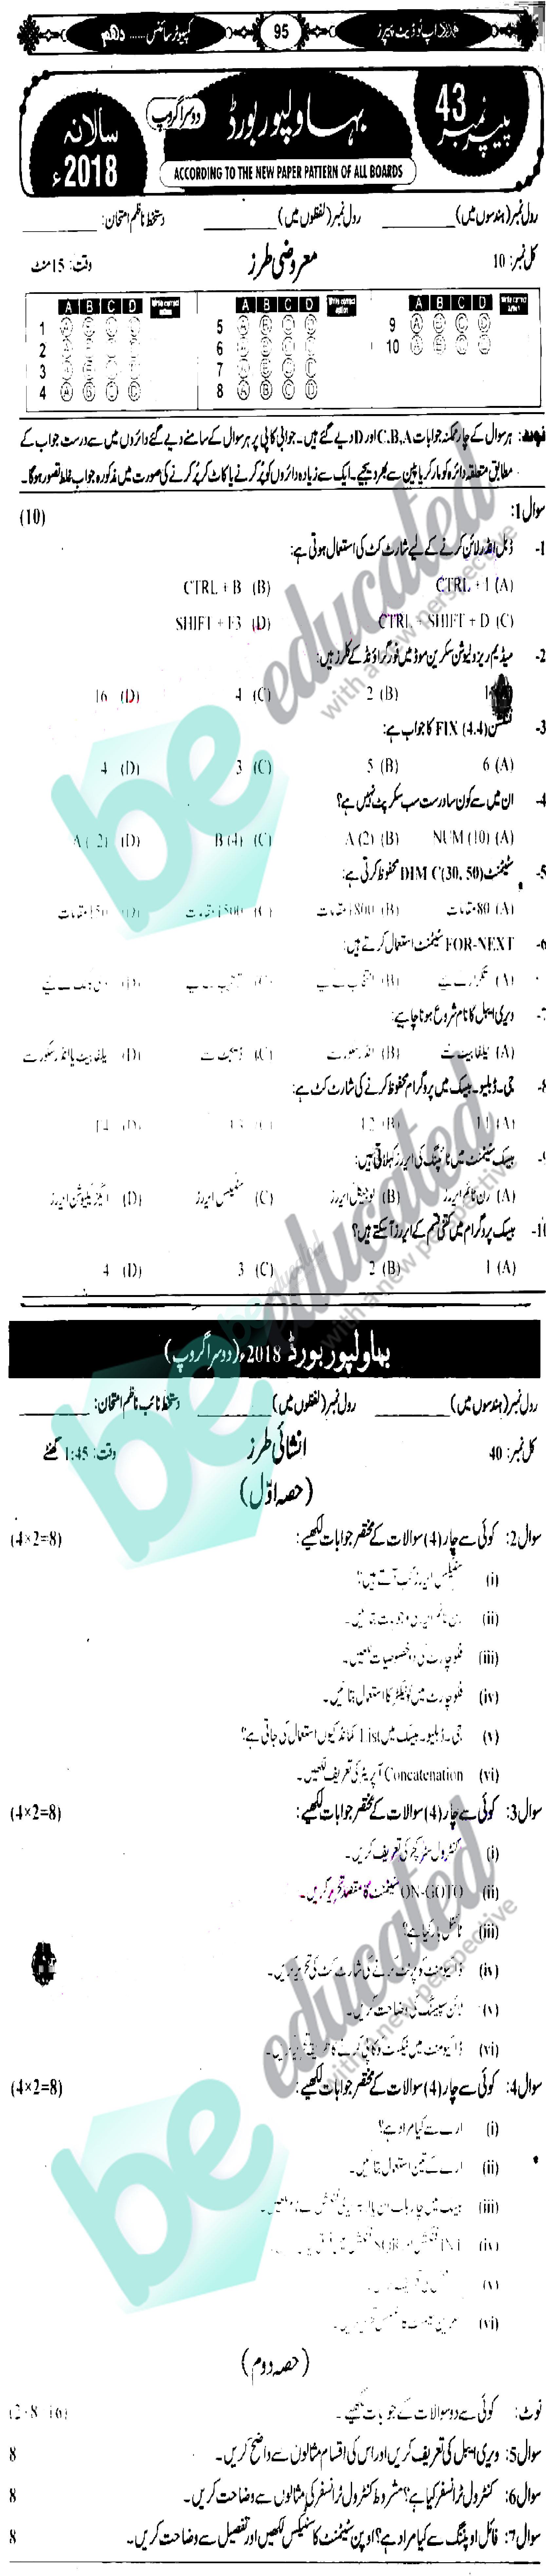 Computer Science 10th class Past Paper Group 2 BISE Bahawalpur 2018